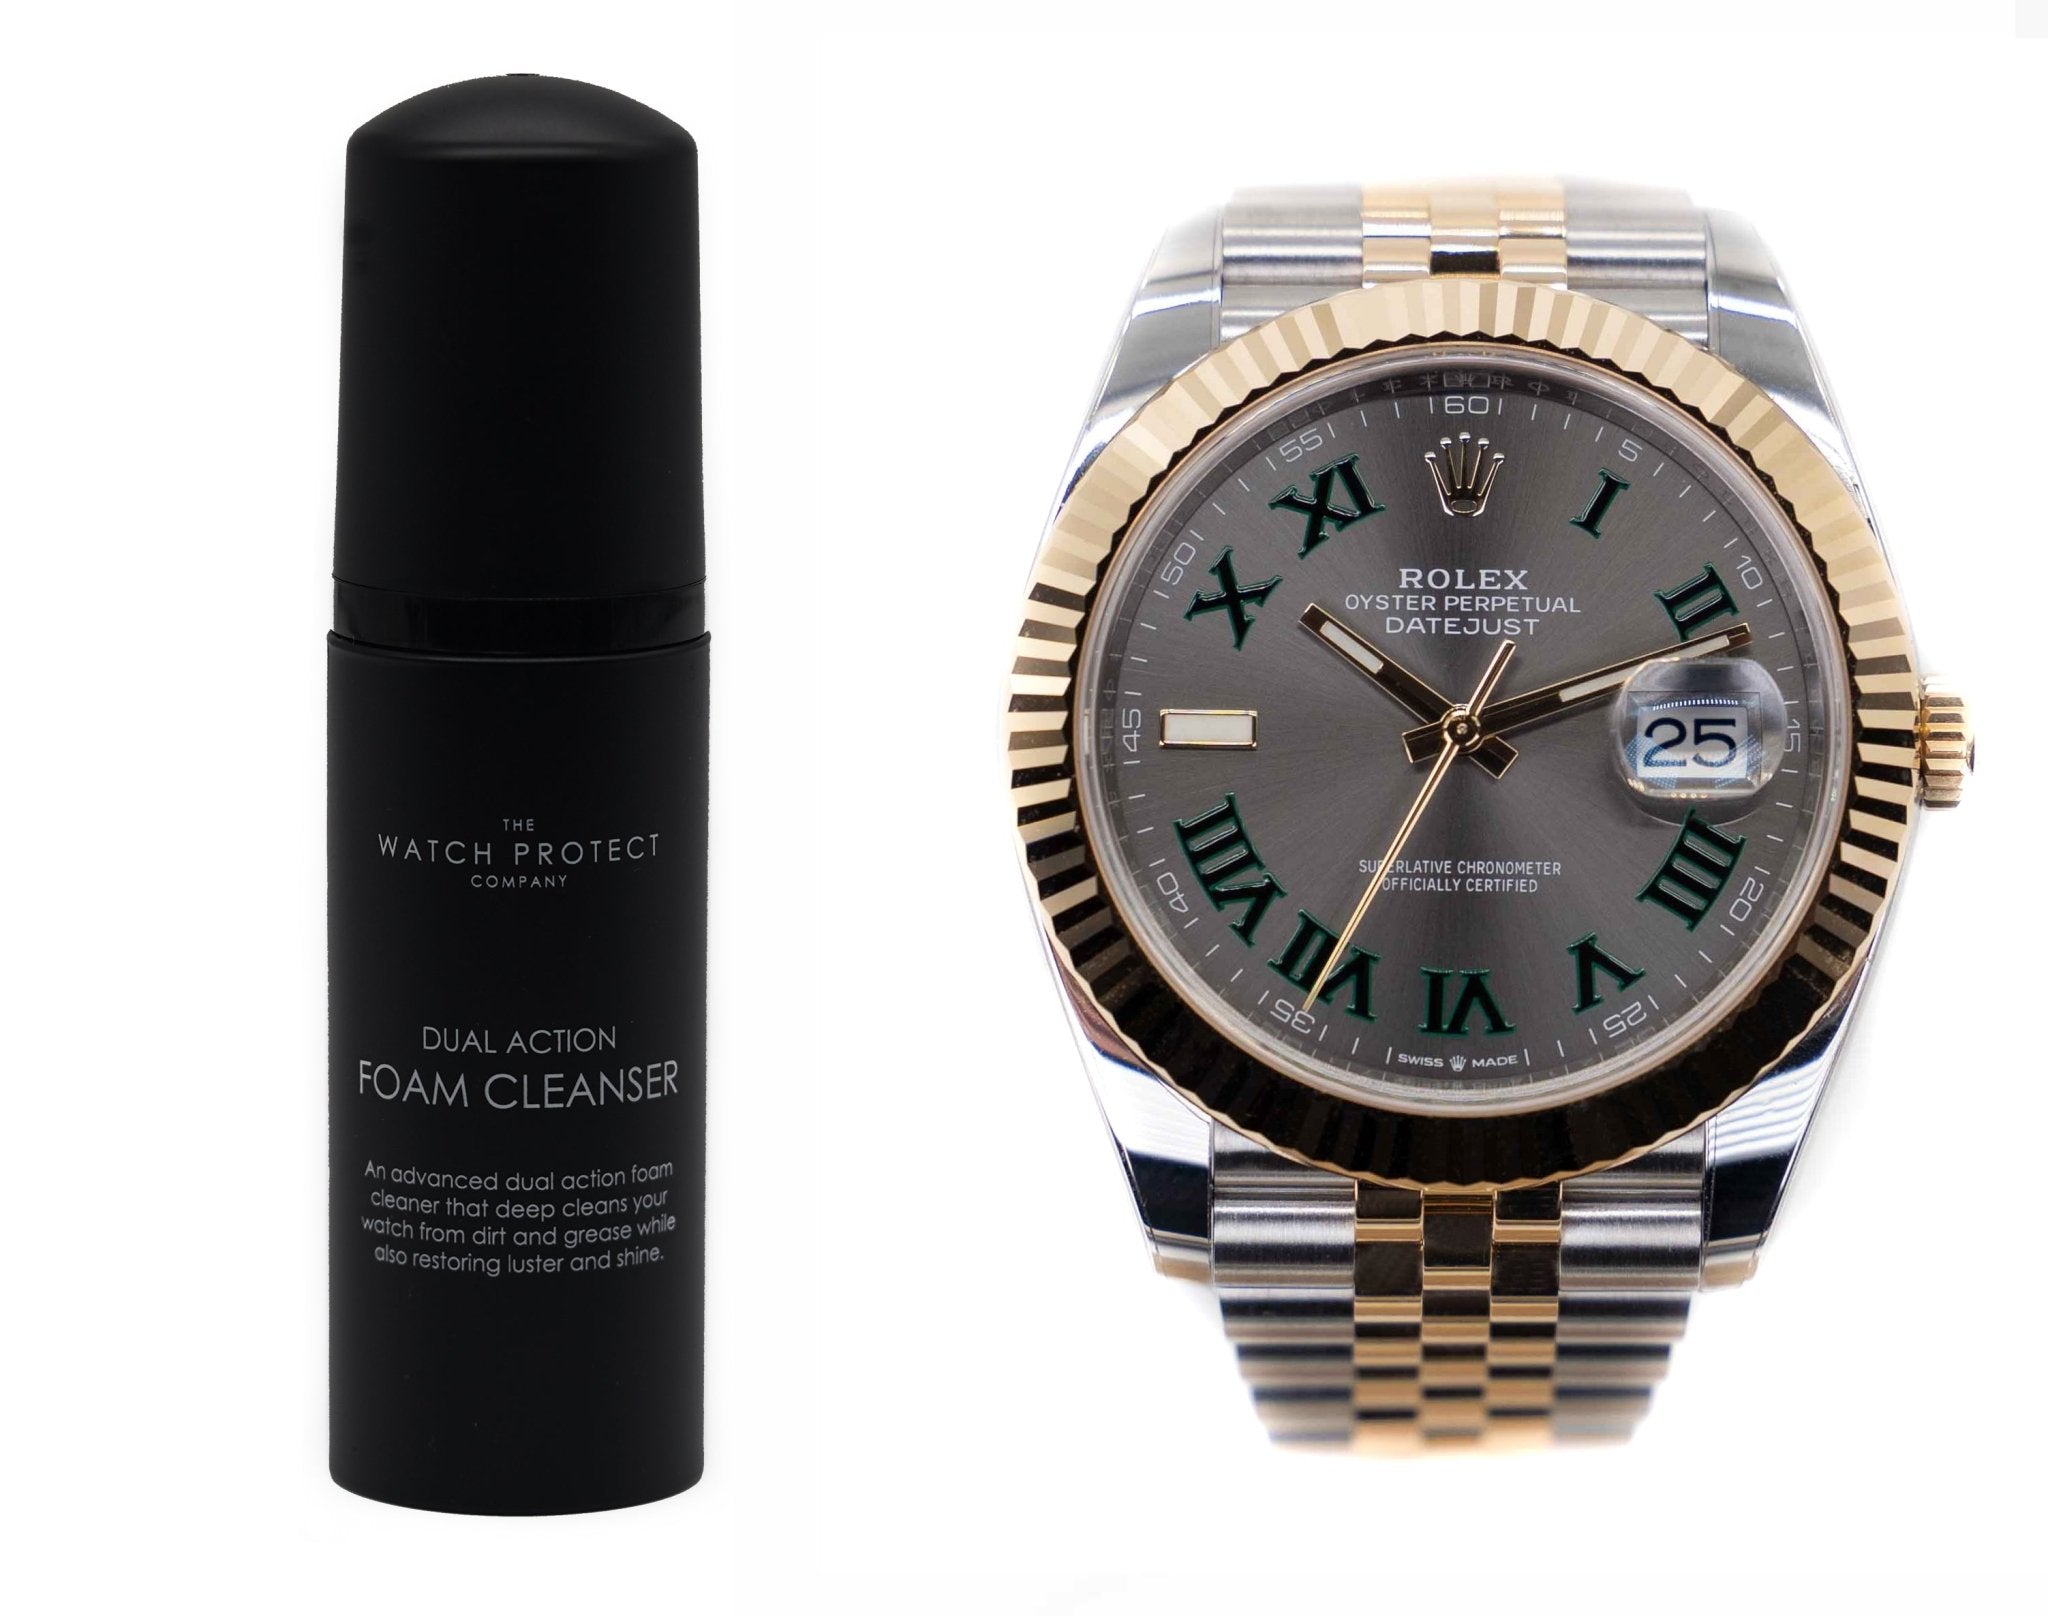 DUAL ACTION FOAM CLEANER & ROLEX DATEJUST 41 126300 - TIER 3 - WATCH PROTECTION KIT BUNDLE - The Watch Protect Company